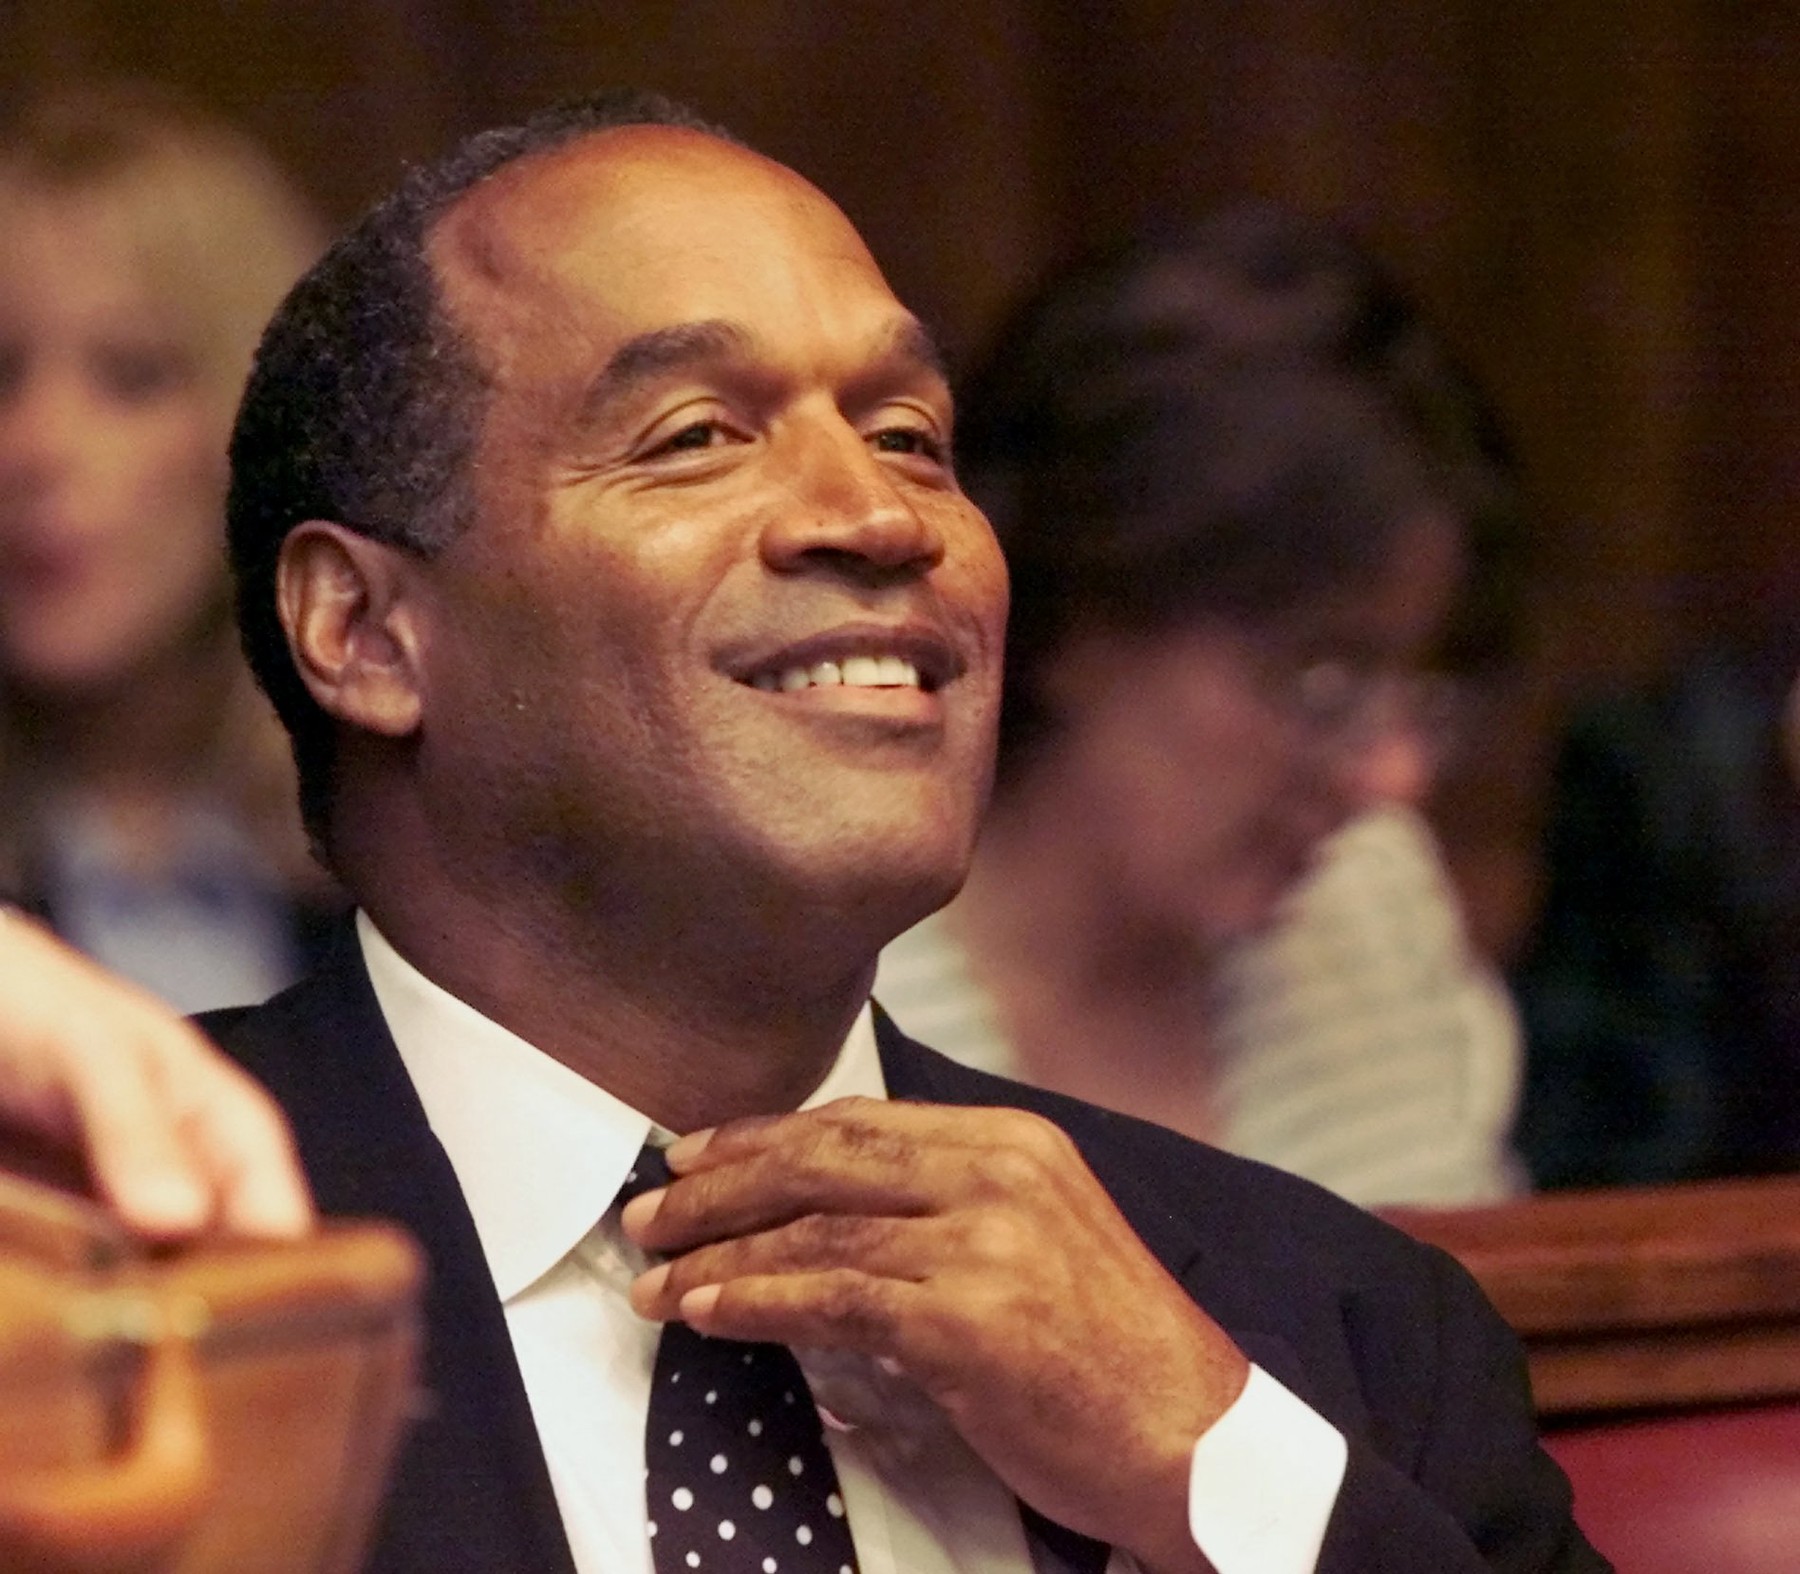 (FILES) O.J. Simpson adjusts his tie before the jury selection of his trial at the Miami circuit court October 9, 2001 in Miami, Florida.  Simpson is on trial for an incident stemming from a December traffic altercation in which a motorist accused him of reaching into his car and pulling off his glasses.  Simpson has died at the age of 76, his family said on April 11, 2024.,Image: 864068875, License: Rights-managed, Restrictions: , Model Release: no, Credit line: AL DIAZ / AFP / Profimedia